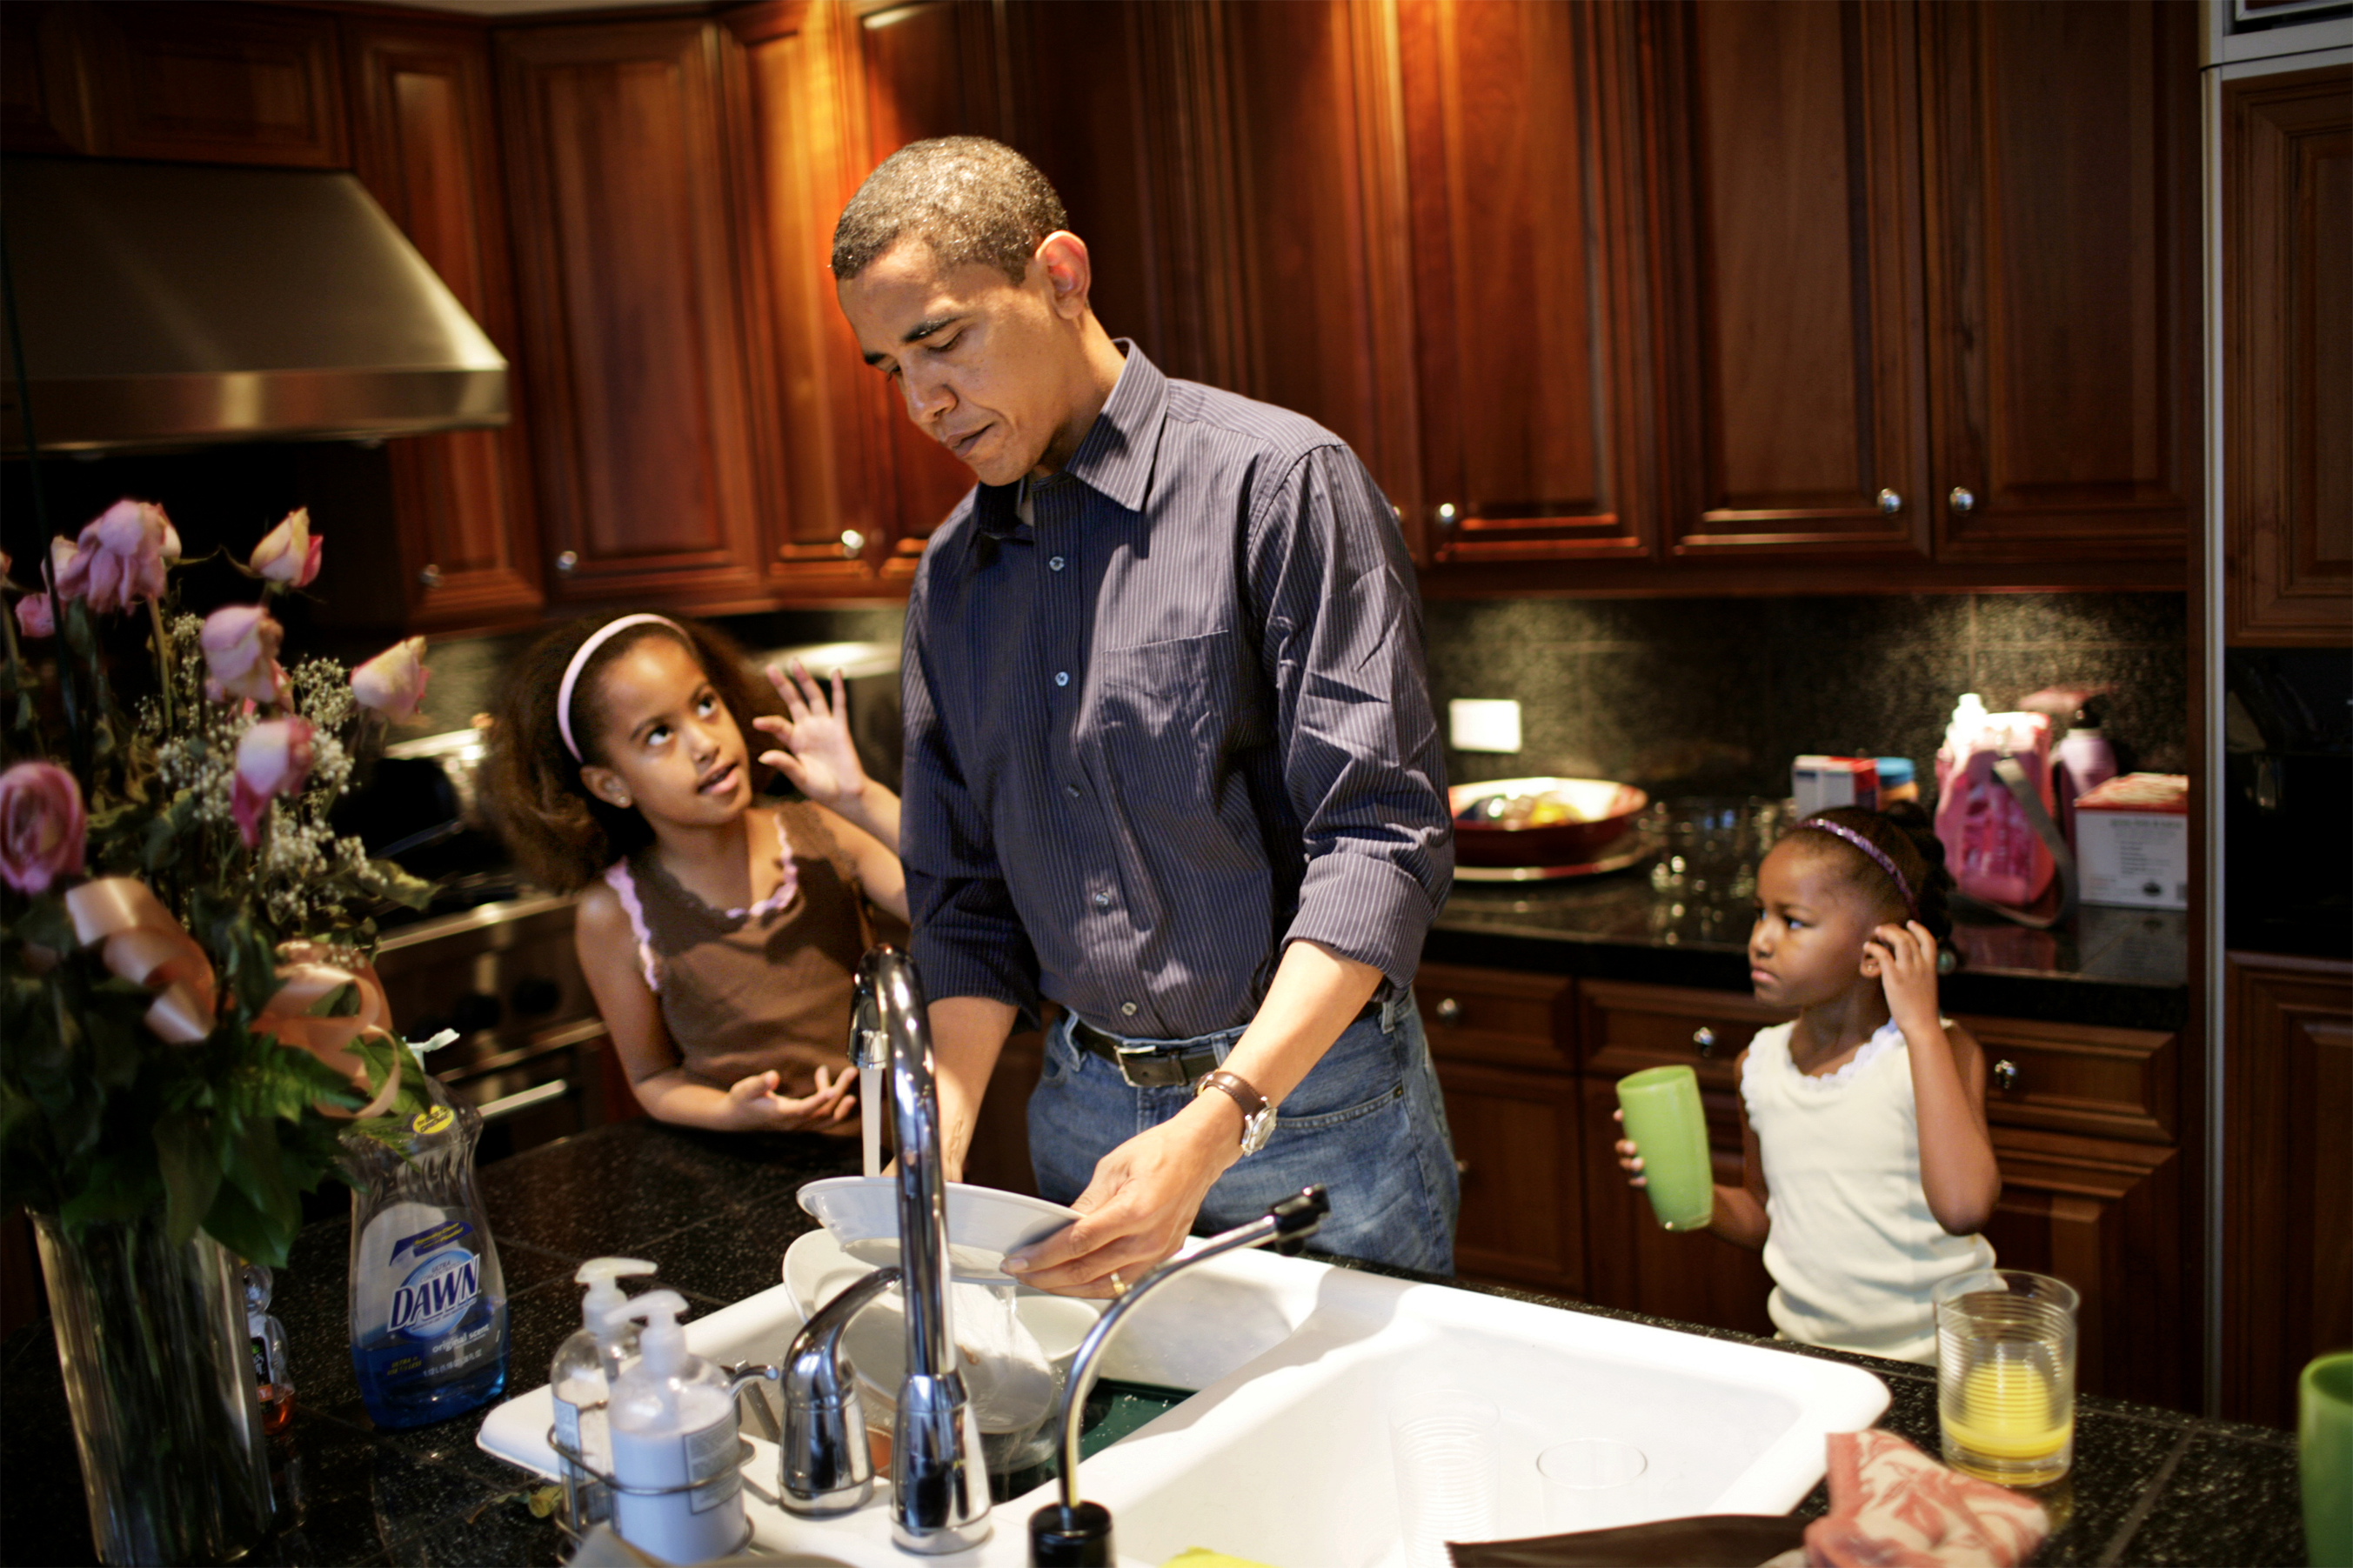 US Senator Barack Obama and his daughters (left) Malia, 8, and Sasha, 5, clean the dishes after breakfast at their home in Hyde Park - a suburb of Chicago, IL.  The girls were getting ready to go to school.